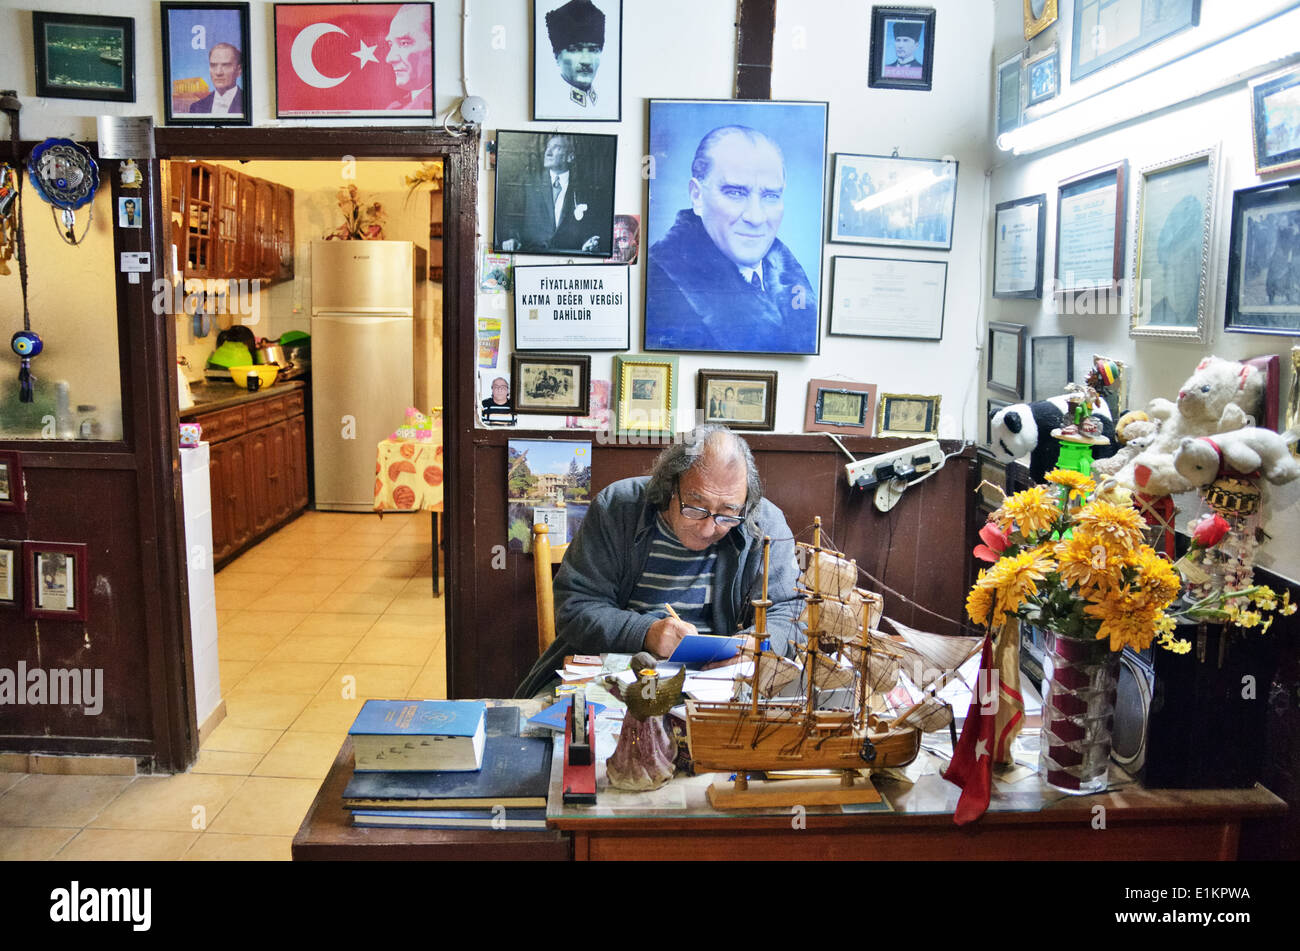 Hotel host on the reception, surrounded by Ataturk portraits, press cuttings, photos and pictures, Lefka, Northern Cyprus Stock Photo